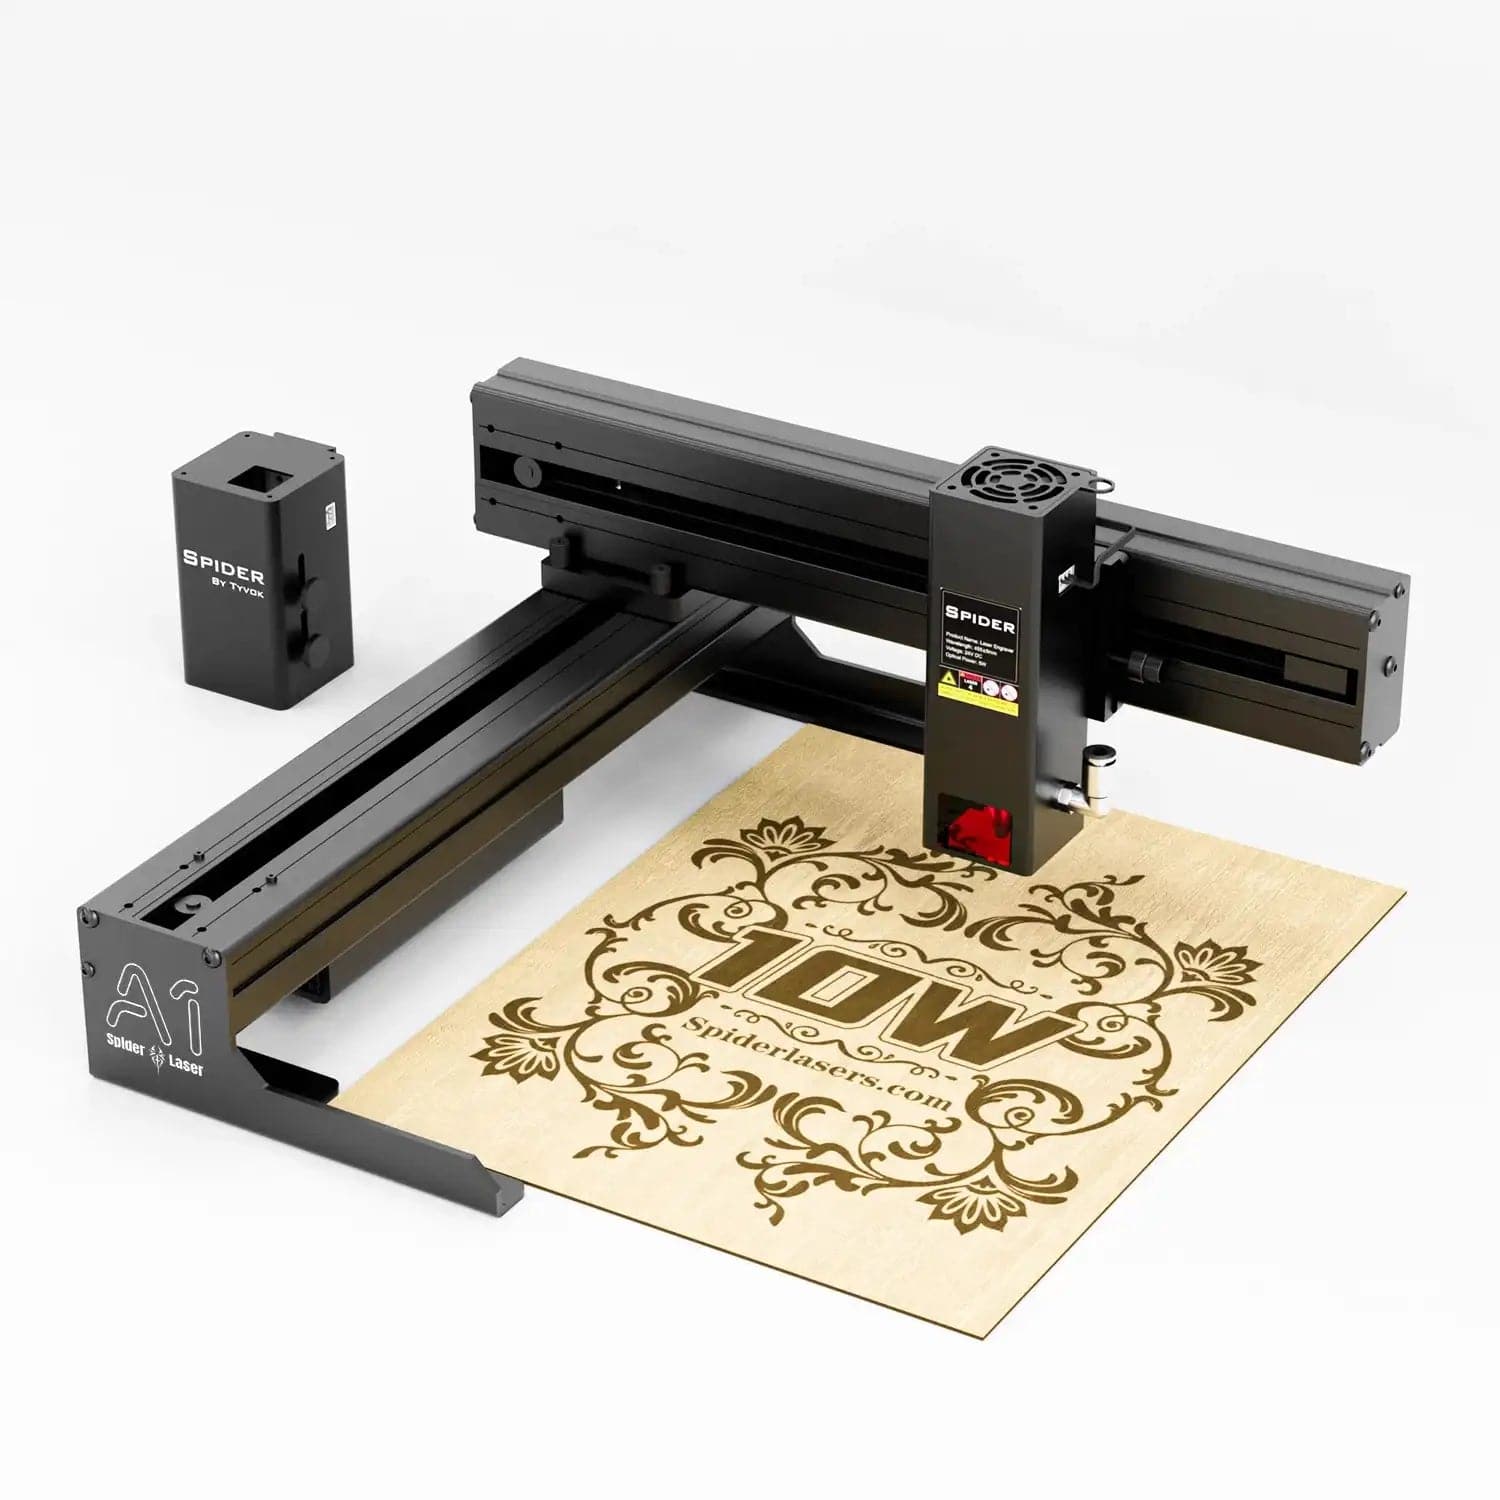 Tyvok Spider A1 Laser Engraver & Cutter 5W/10W
Compact and easy to place Foldable and requires no installation.
Product integration, no external cables Support 5W, 10W and 20W laser engraving.
Supports artist LiTyvok Spider A1 Laser Engraver & Cutter 5W/10WLaser Engraving and Cutting